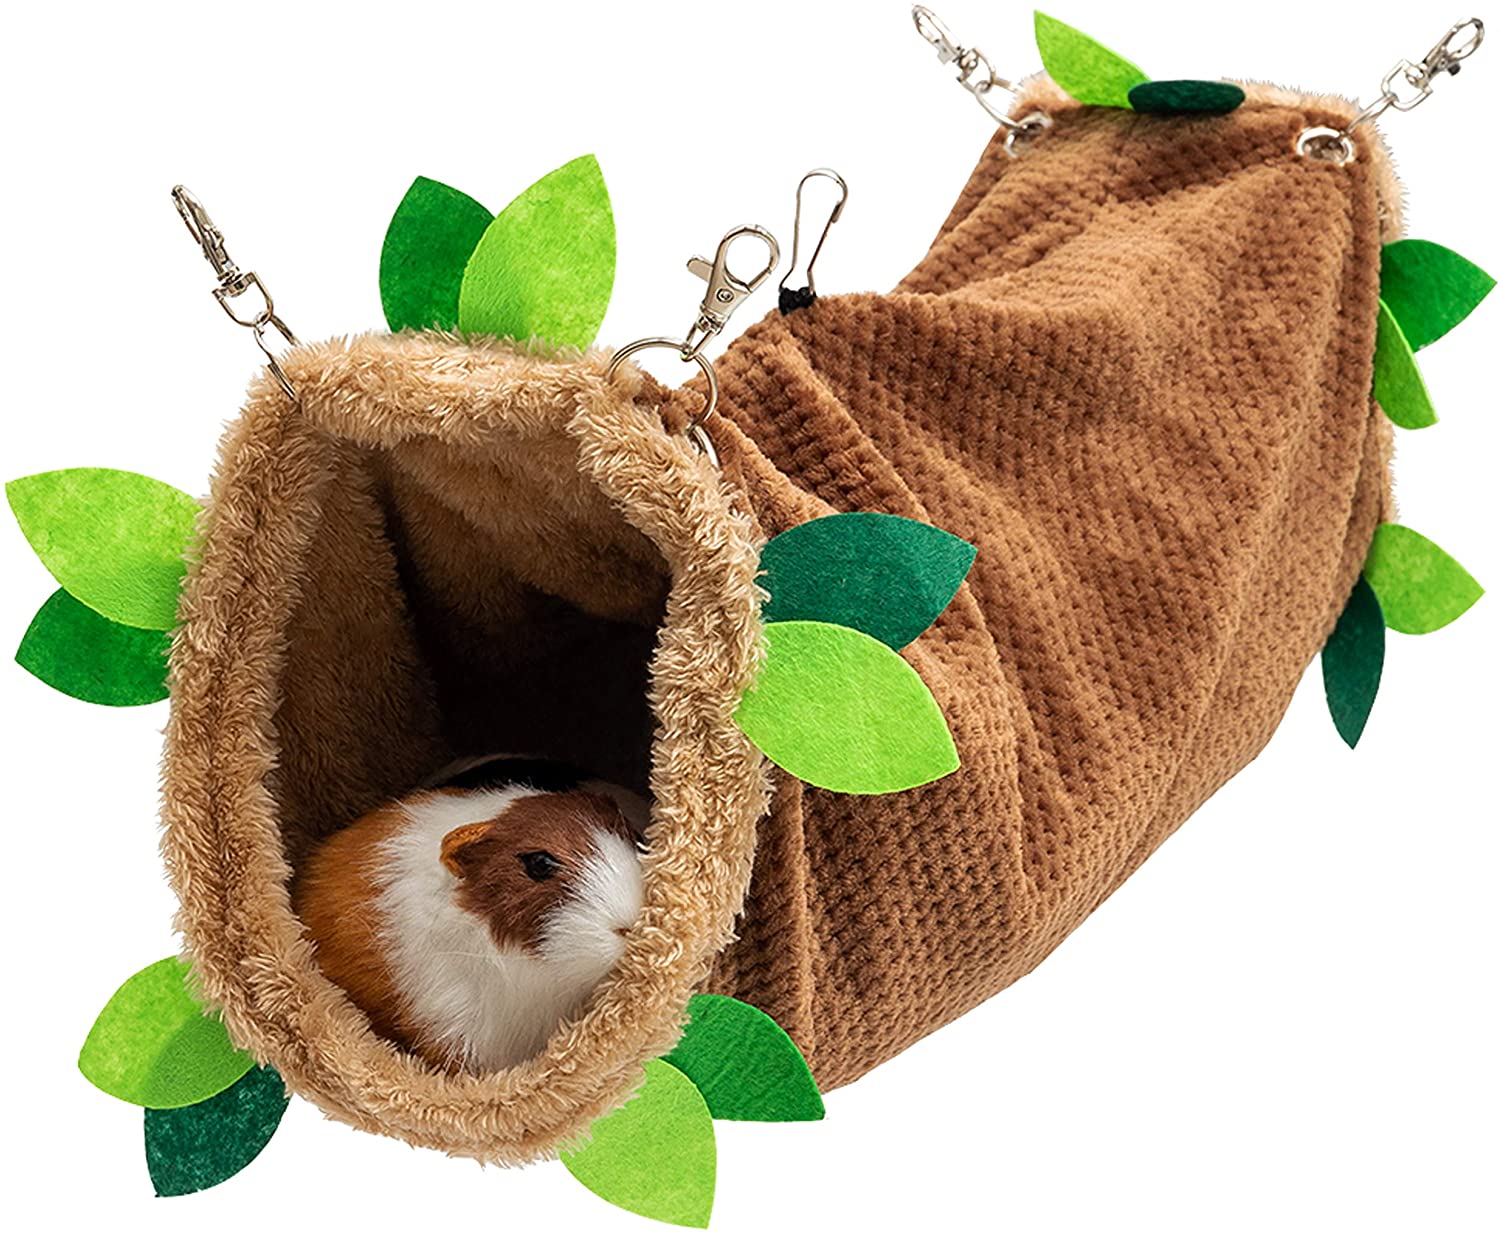 Guinea Pig Hanging Hammock Hideout Tunnel Triple Tier Warm Bed Tube Cage Swing Cave Mat Bedding Playing and Sleeping for Small Animal Hamster Gerbil Dwarf Rat 